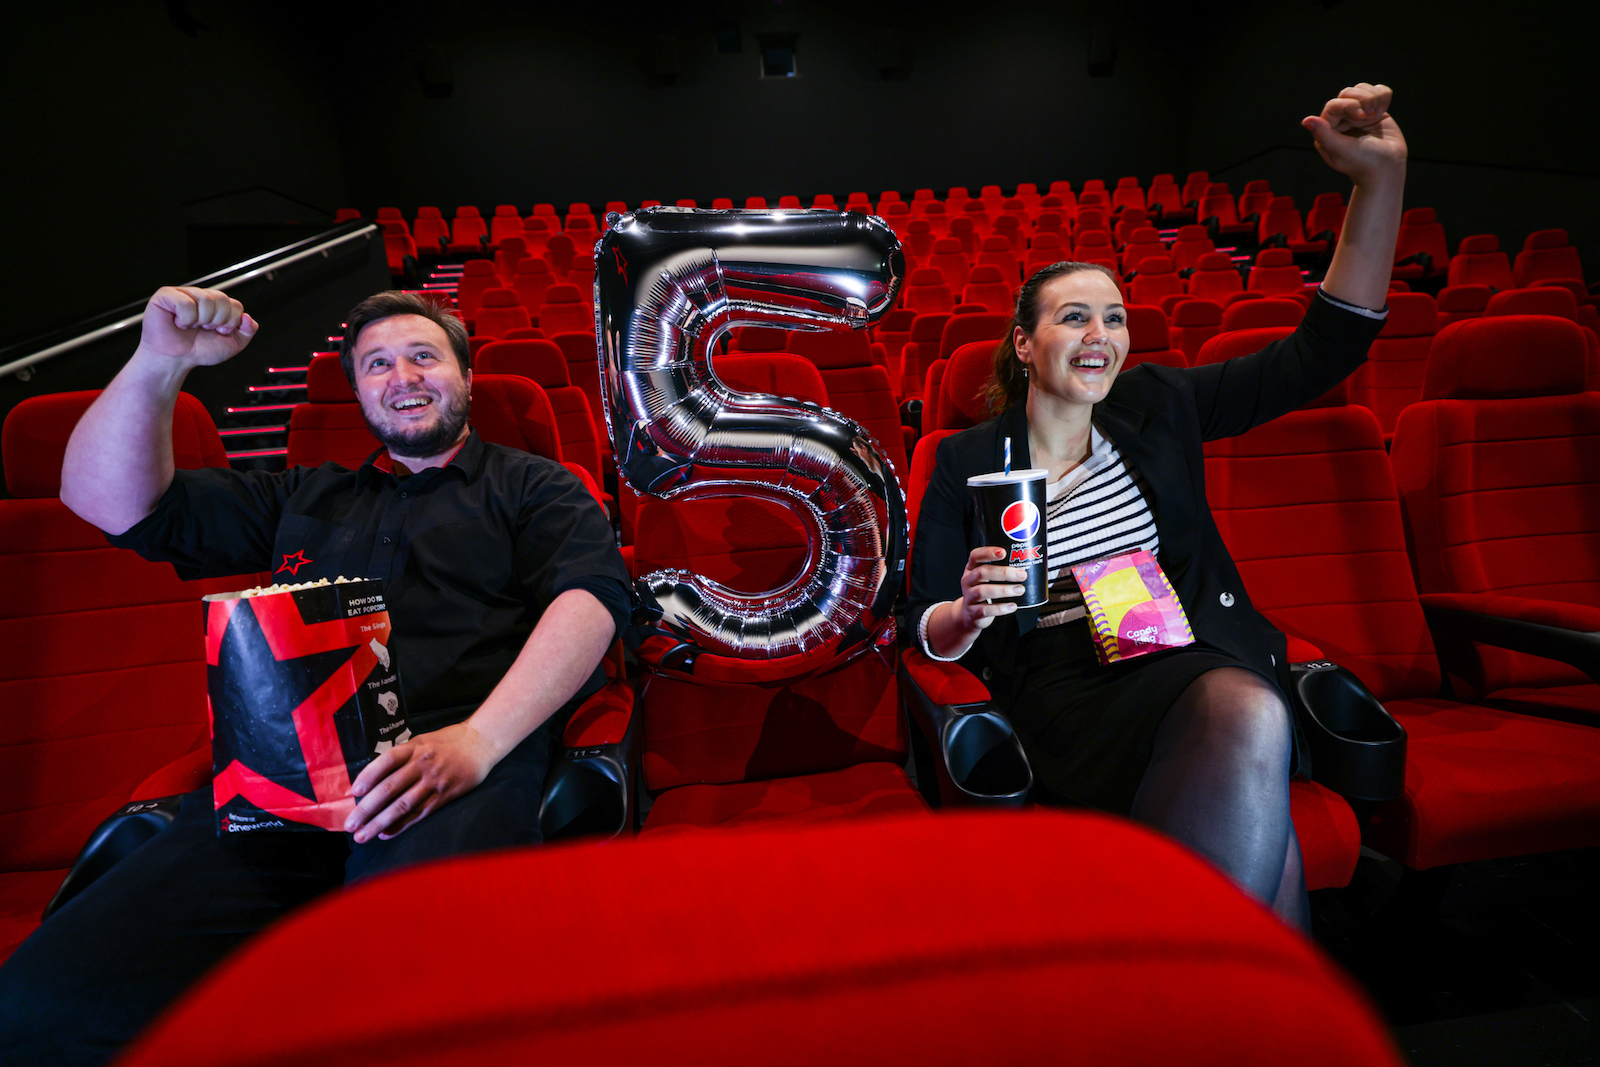 Man and woman sit in a movie theatre on red velvet seats. On the left sits the man with short brown hair and beard in all black clothing. He holds a bag of popcorn and has one fist up in the air in a joyful pose. On the right sits a woman with dark hair slicked back in a ponytail wearing a striped top and black blazer holding a drink in one hand and with fist up in the air like the man. Both are smiling and there is a '5' balloon placed in between them.